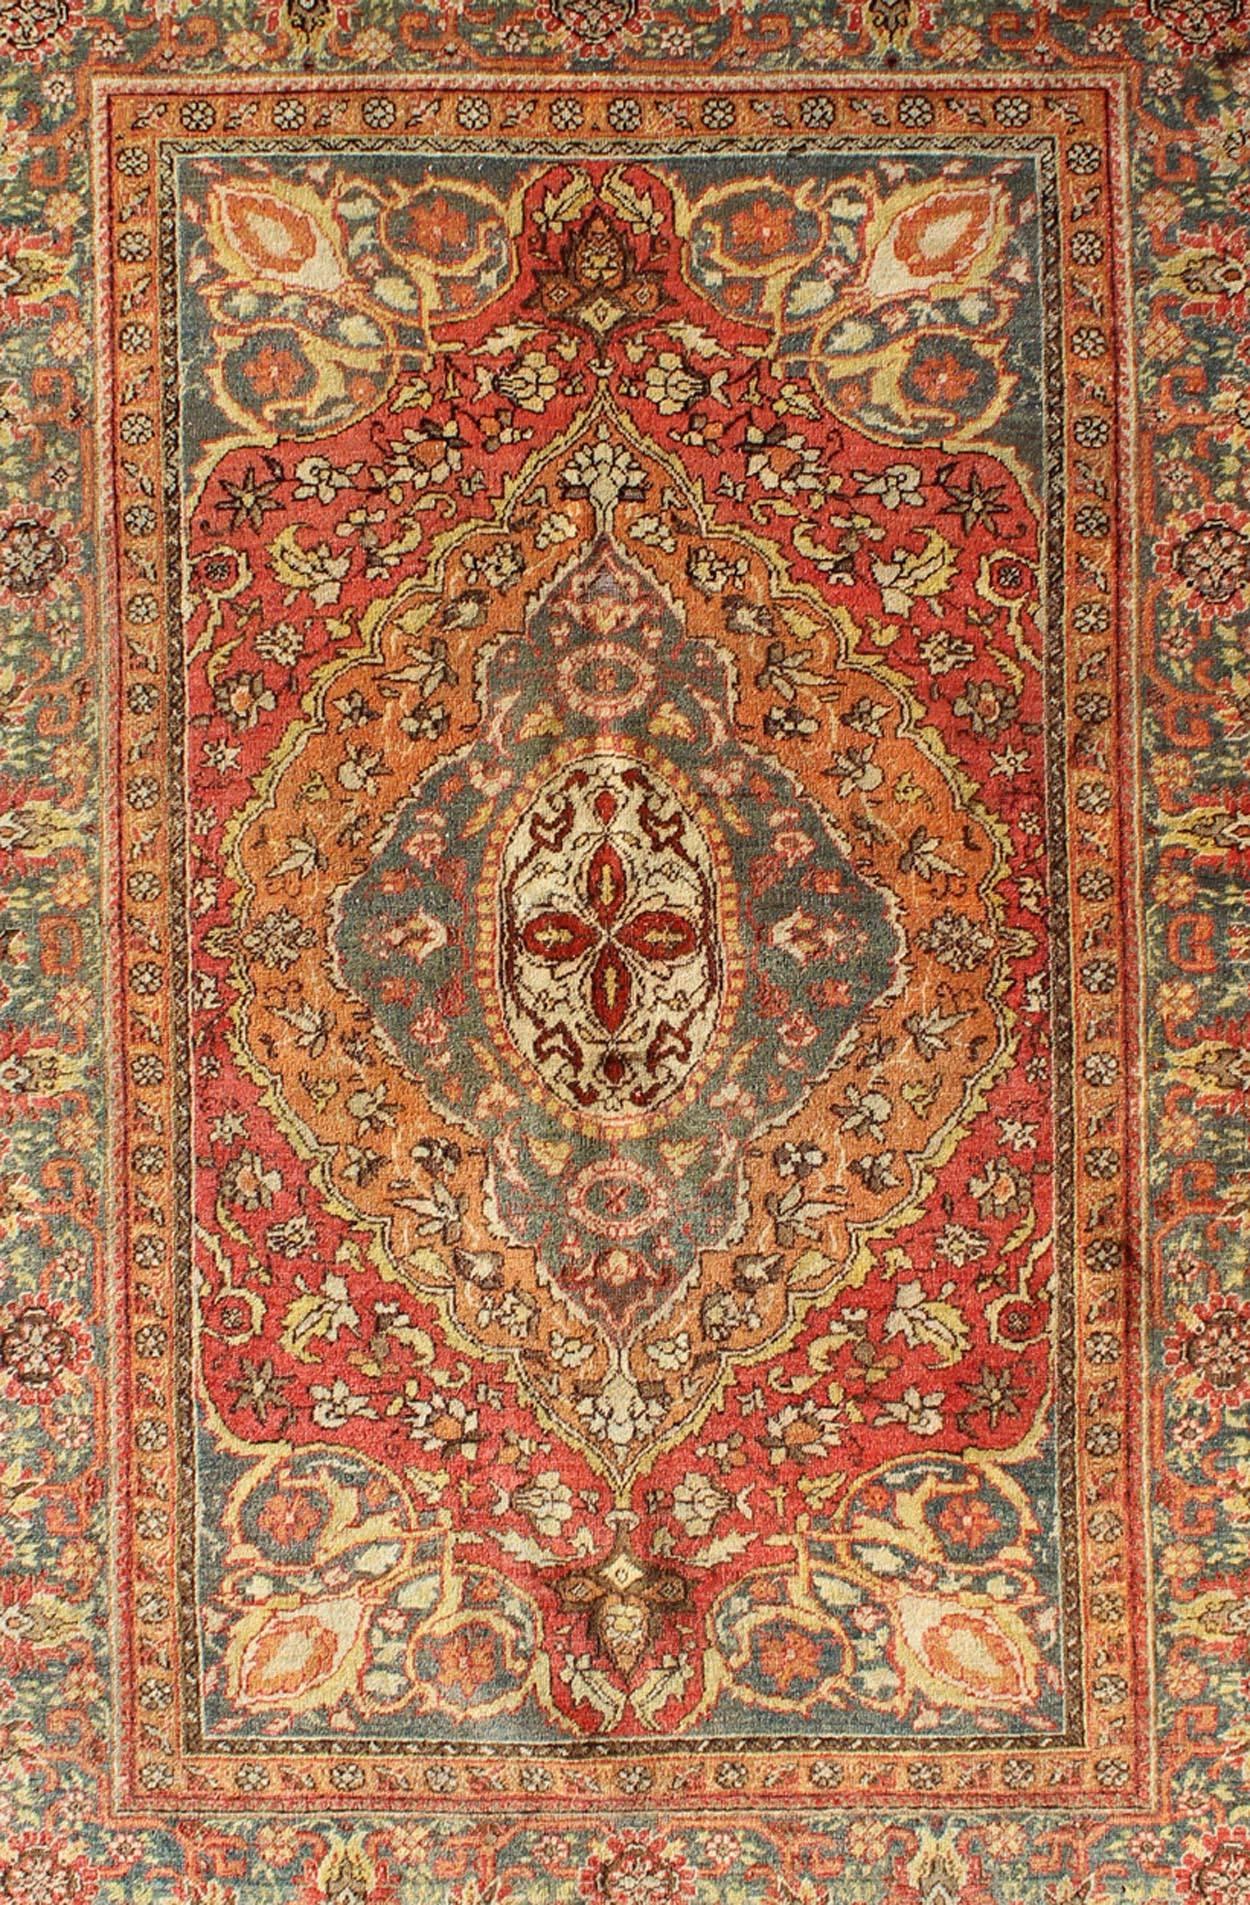 Oushak Antique Turkish Sivas Rug with Multi-Layered Medallion in Red, Teal & Orange For Sale